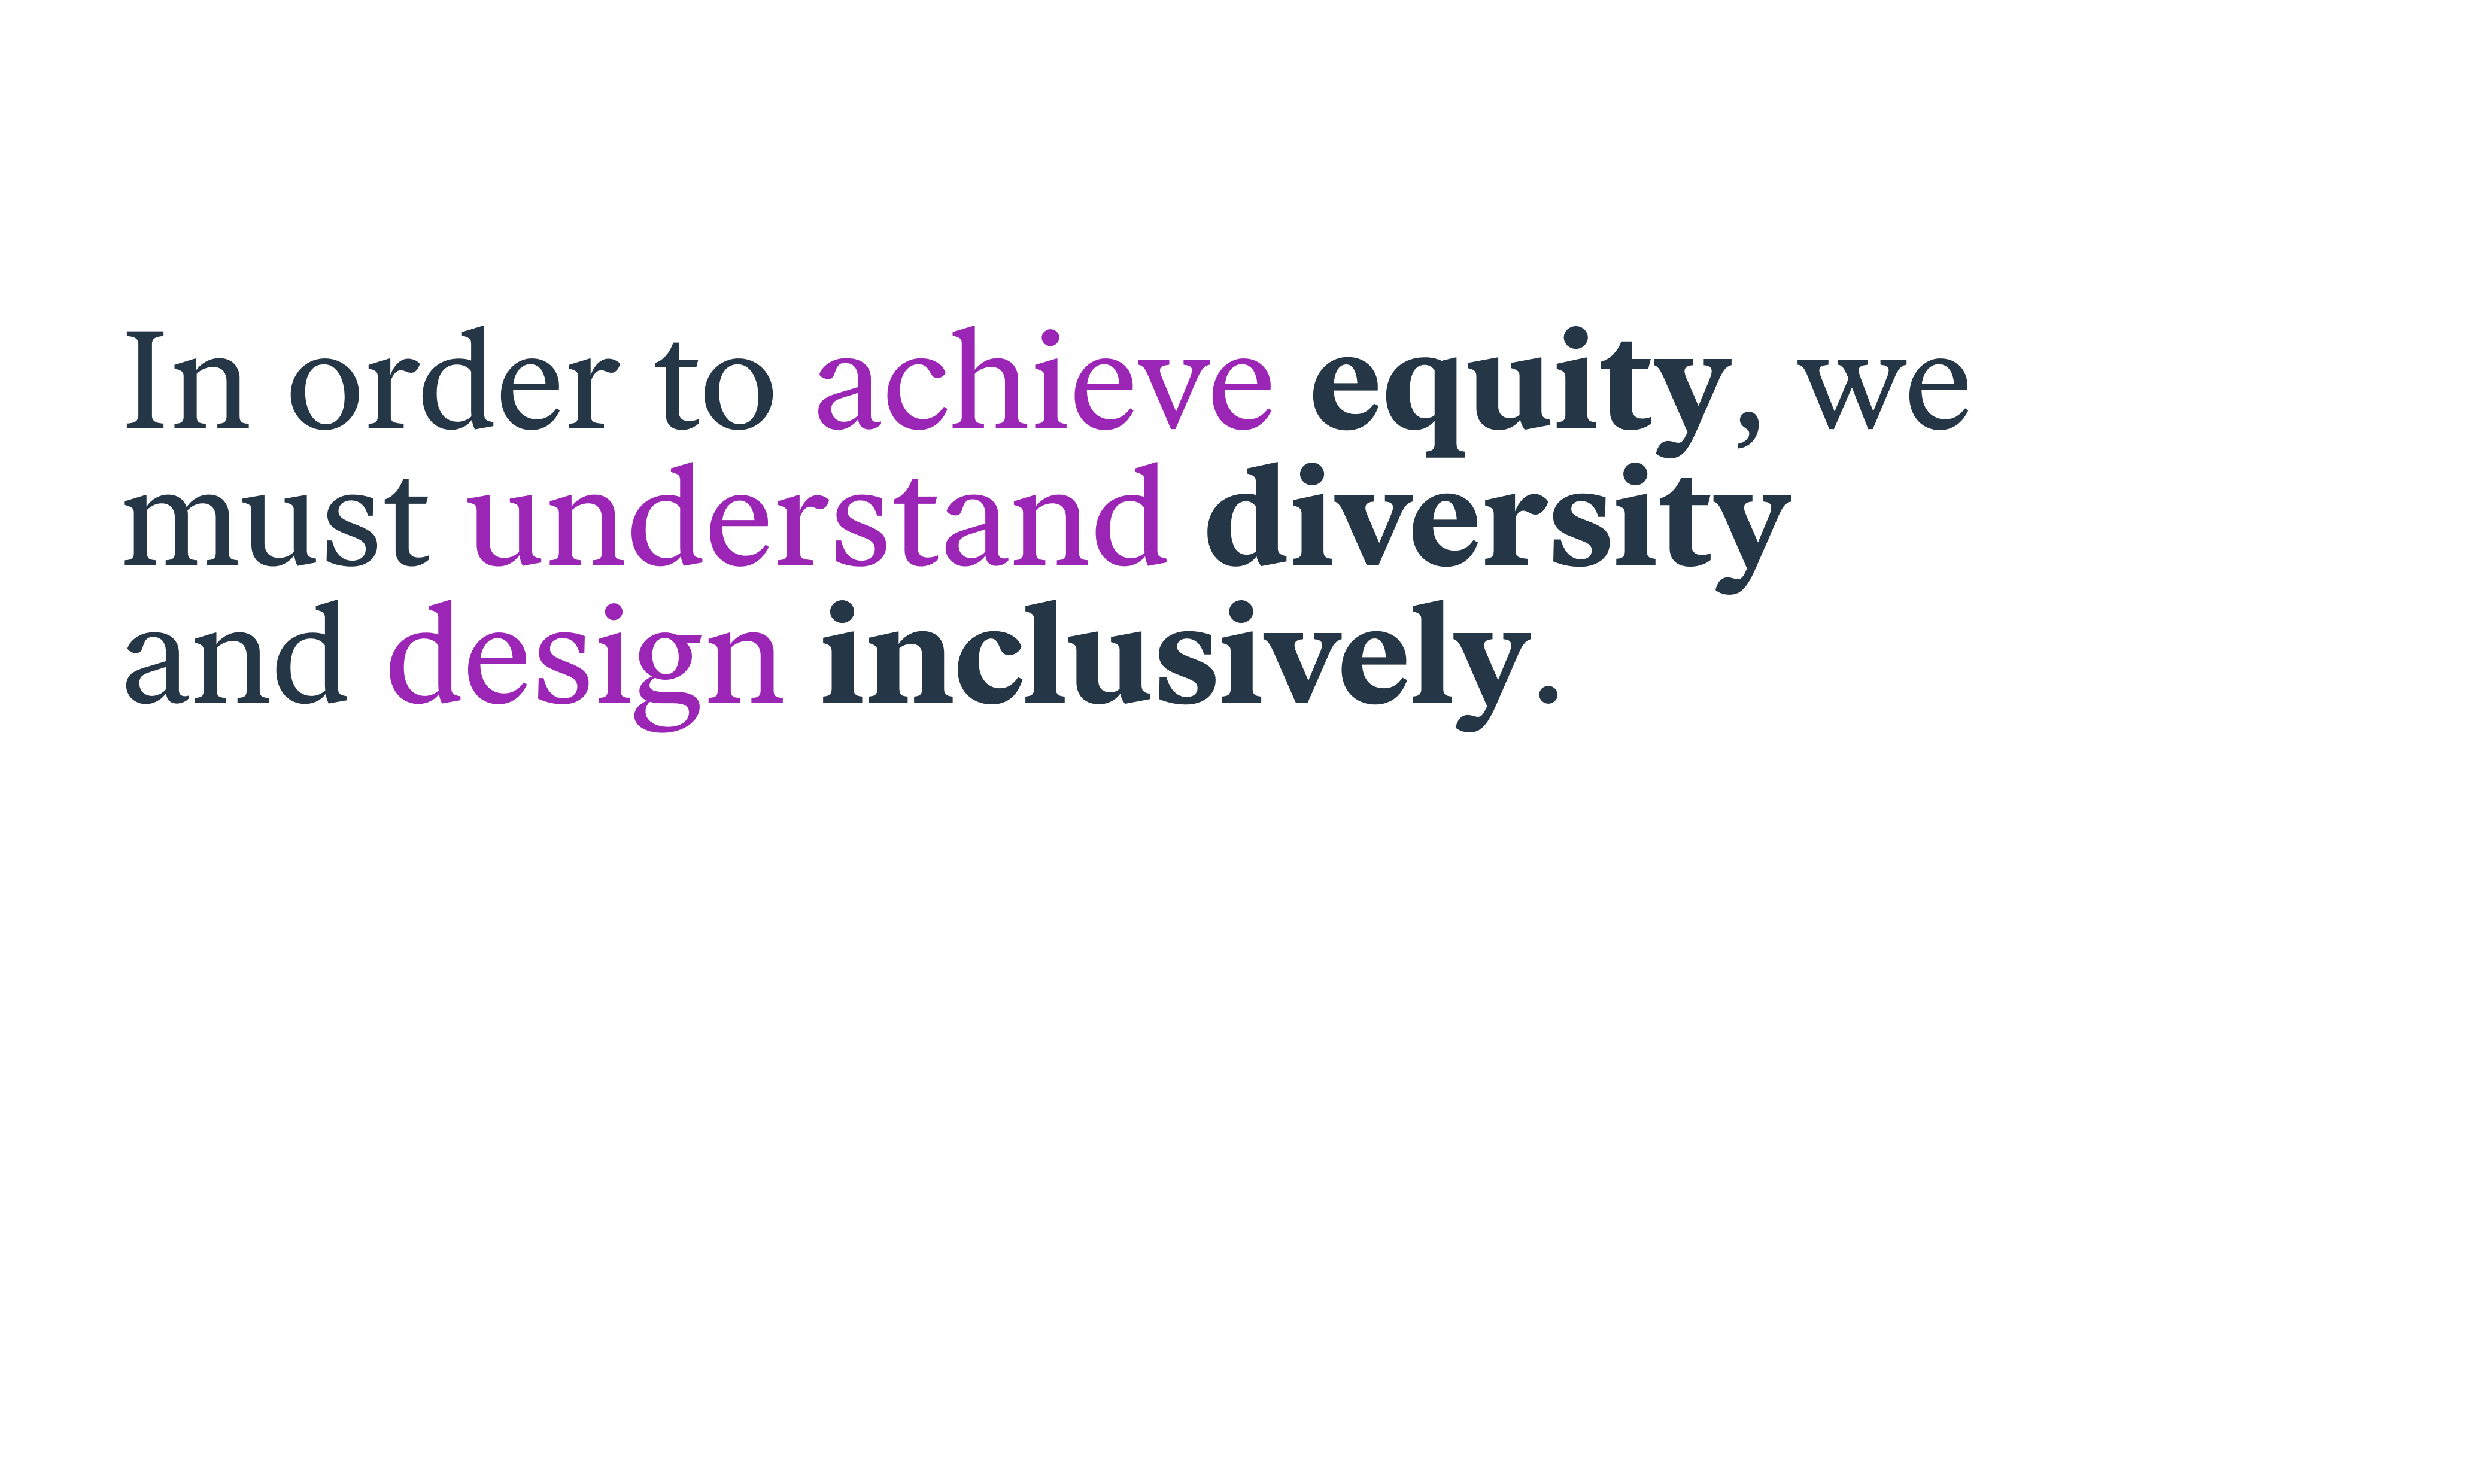 In order to achieve equity, we must understand diversity and design inclusively.